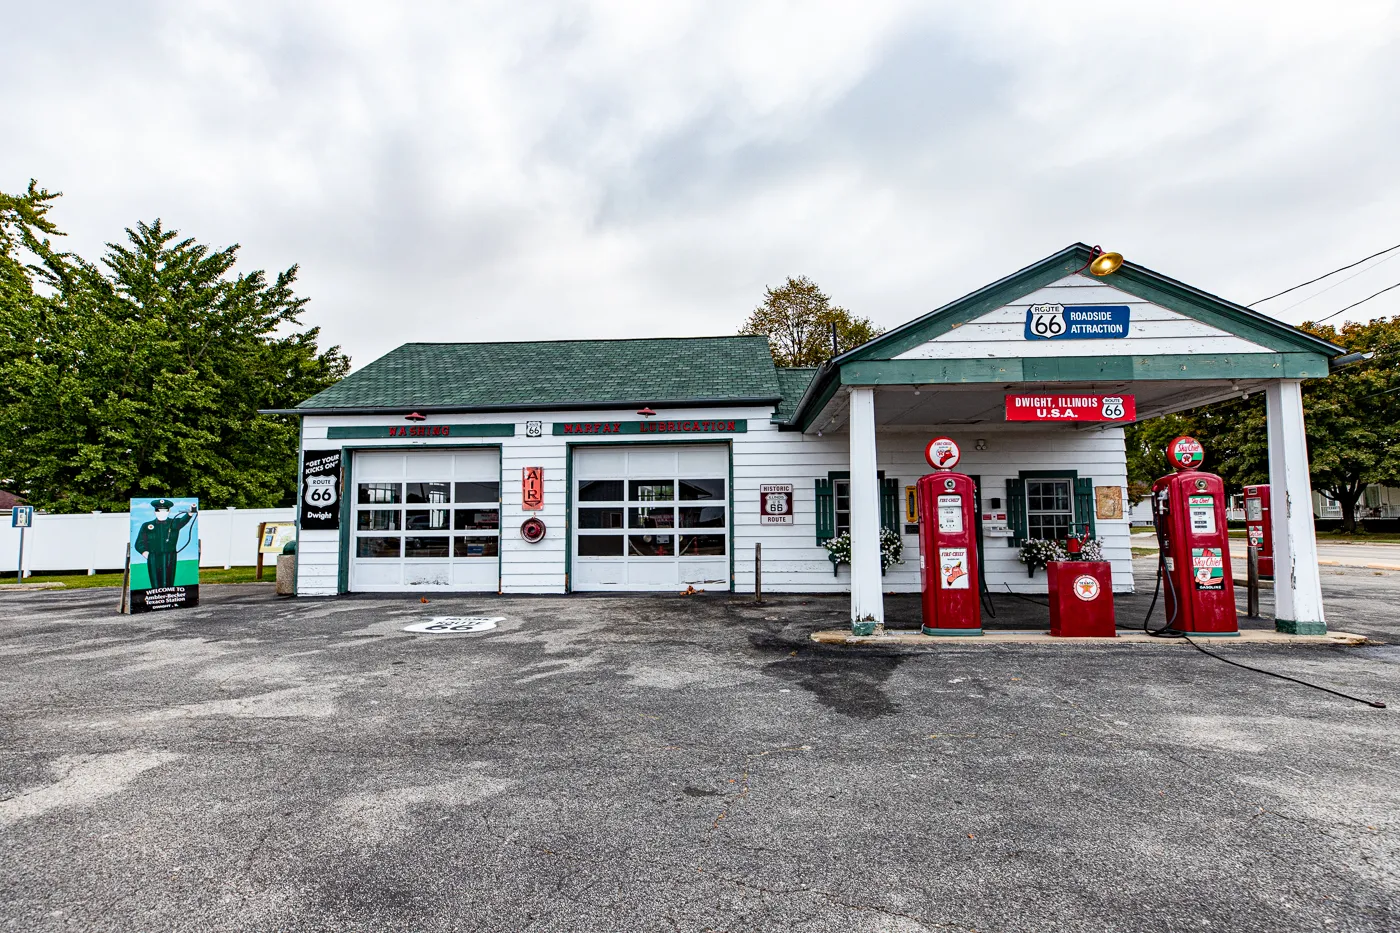 Ambler's Texaco Gas Station in Dwight, Illinois Route 66 Roadside Attraction